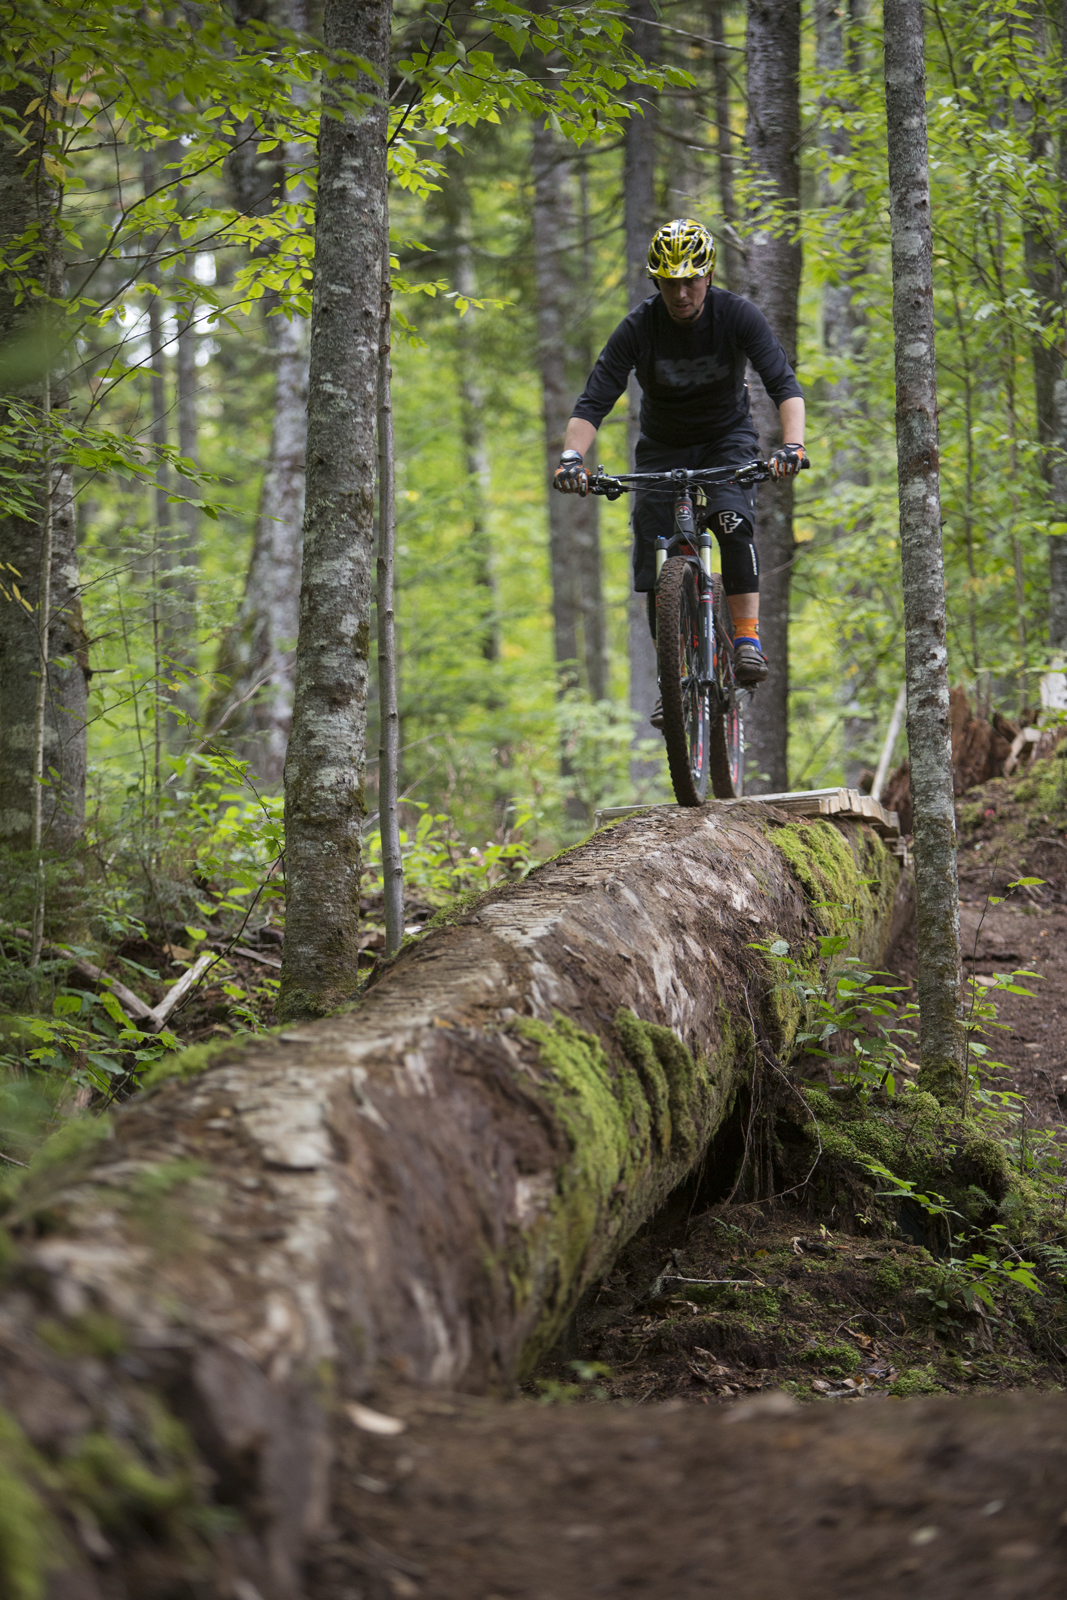 A cyclist enjoying the outdoor sport of mountain biking on a tree trunk, one of the sections of the Boréal Trail, surrounded by nature.